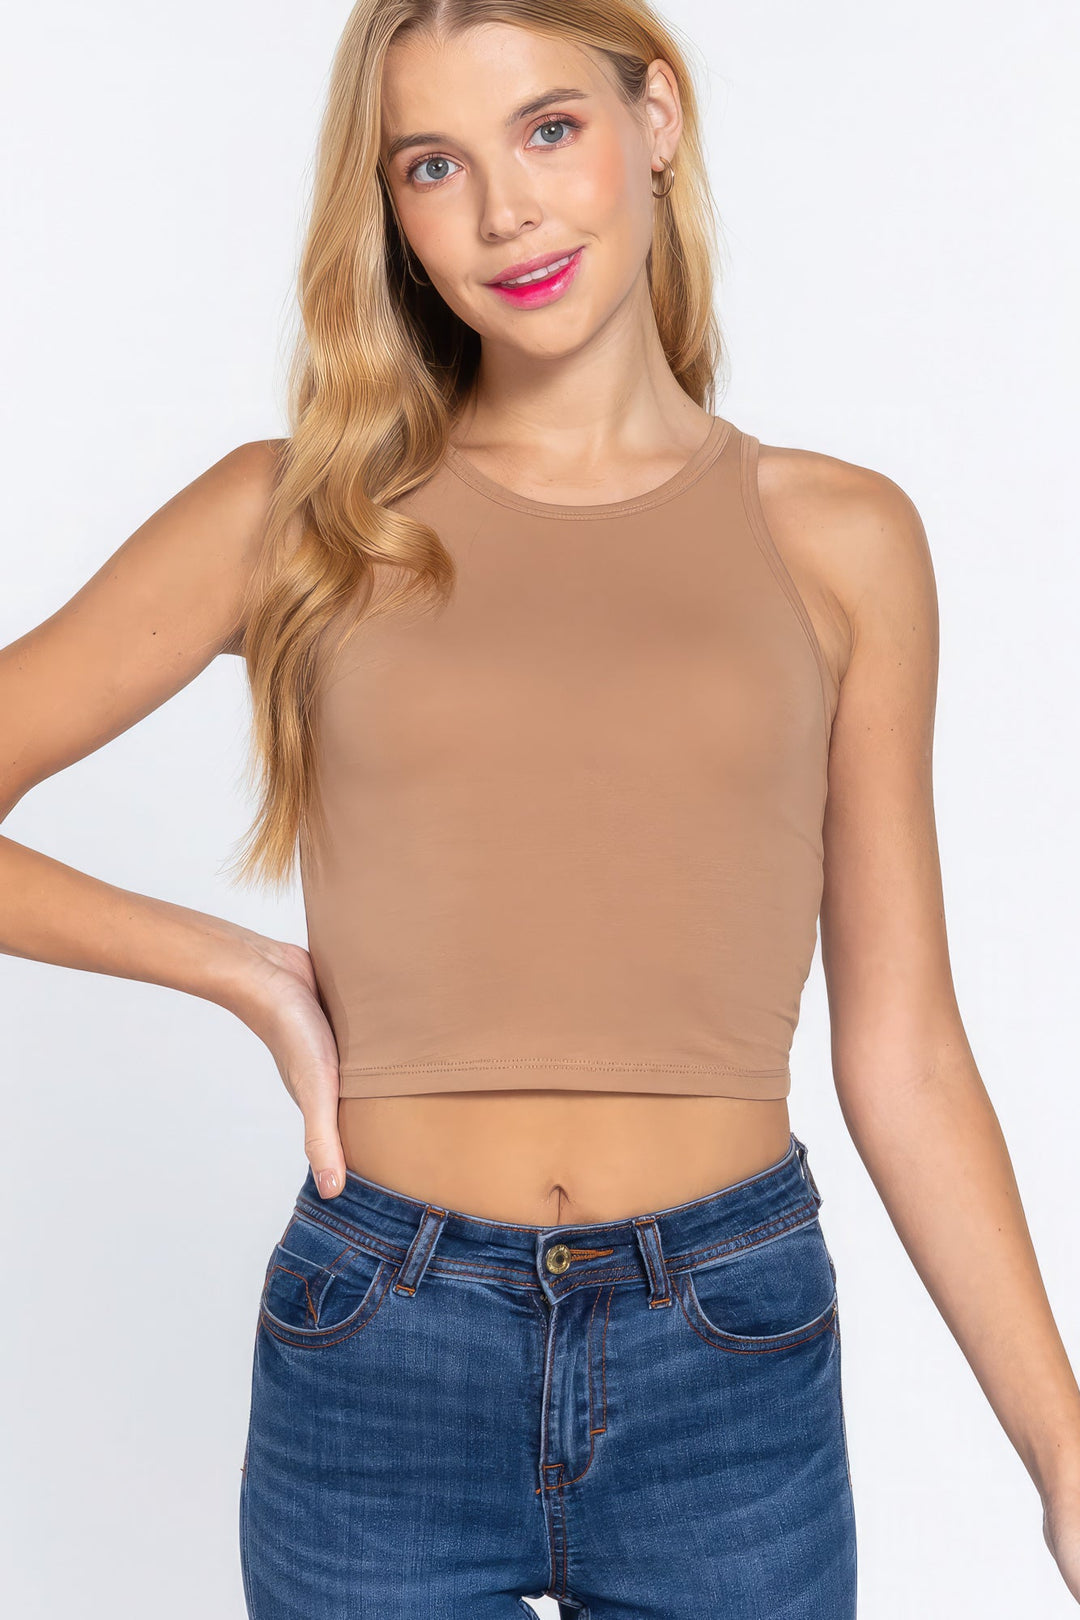 The802Gypsy  shirts and tops Natural Tan / S ❤GYPSY LOVE-Halter Neck Crop Top